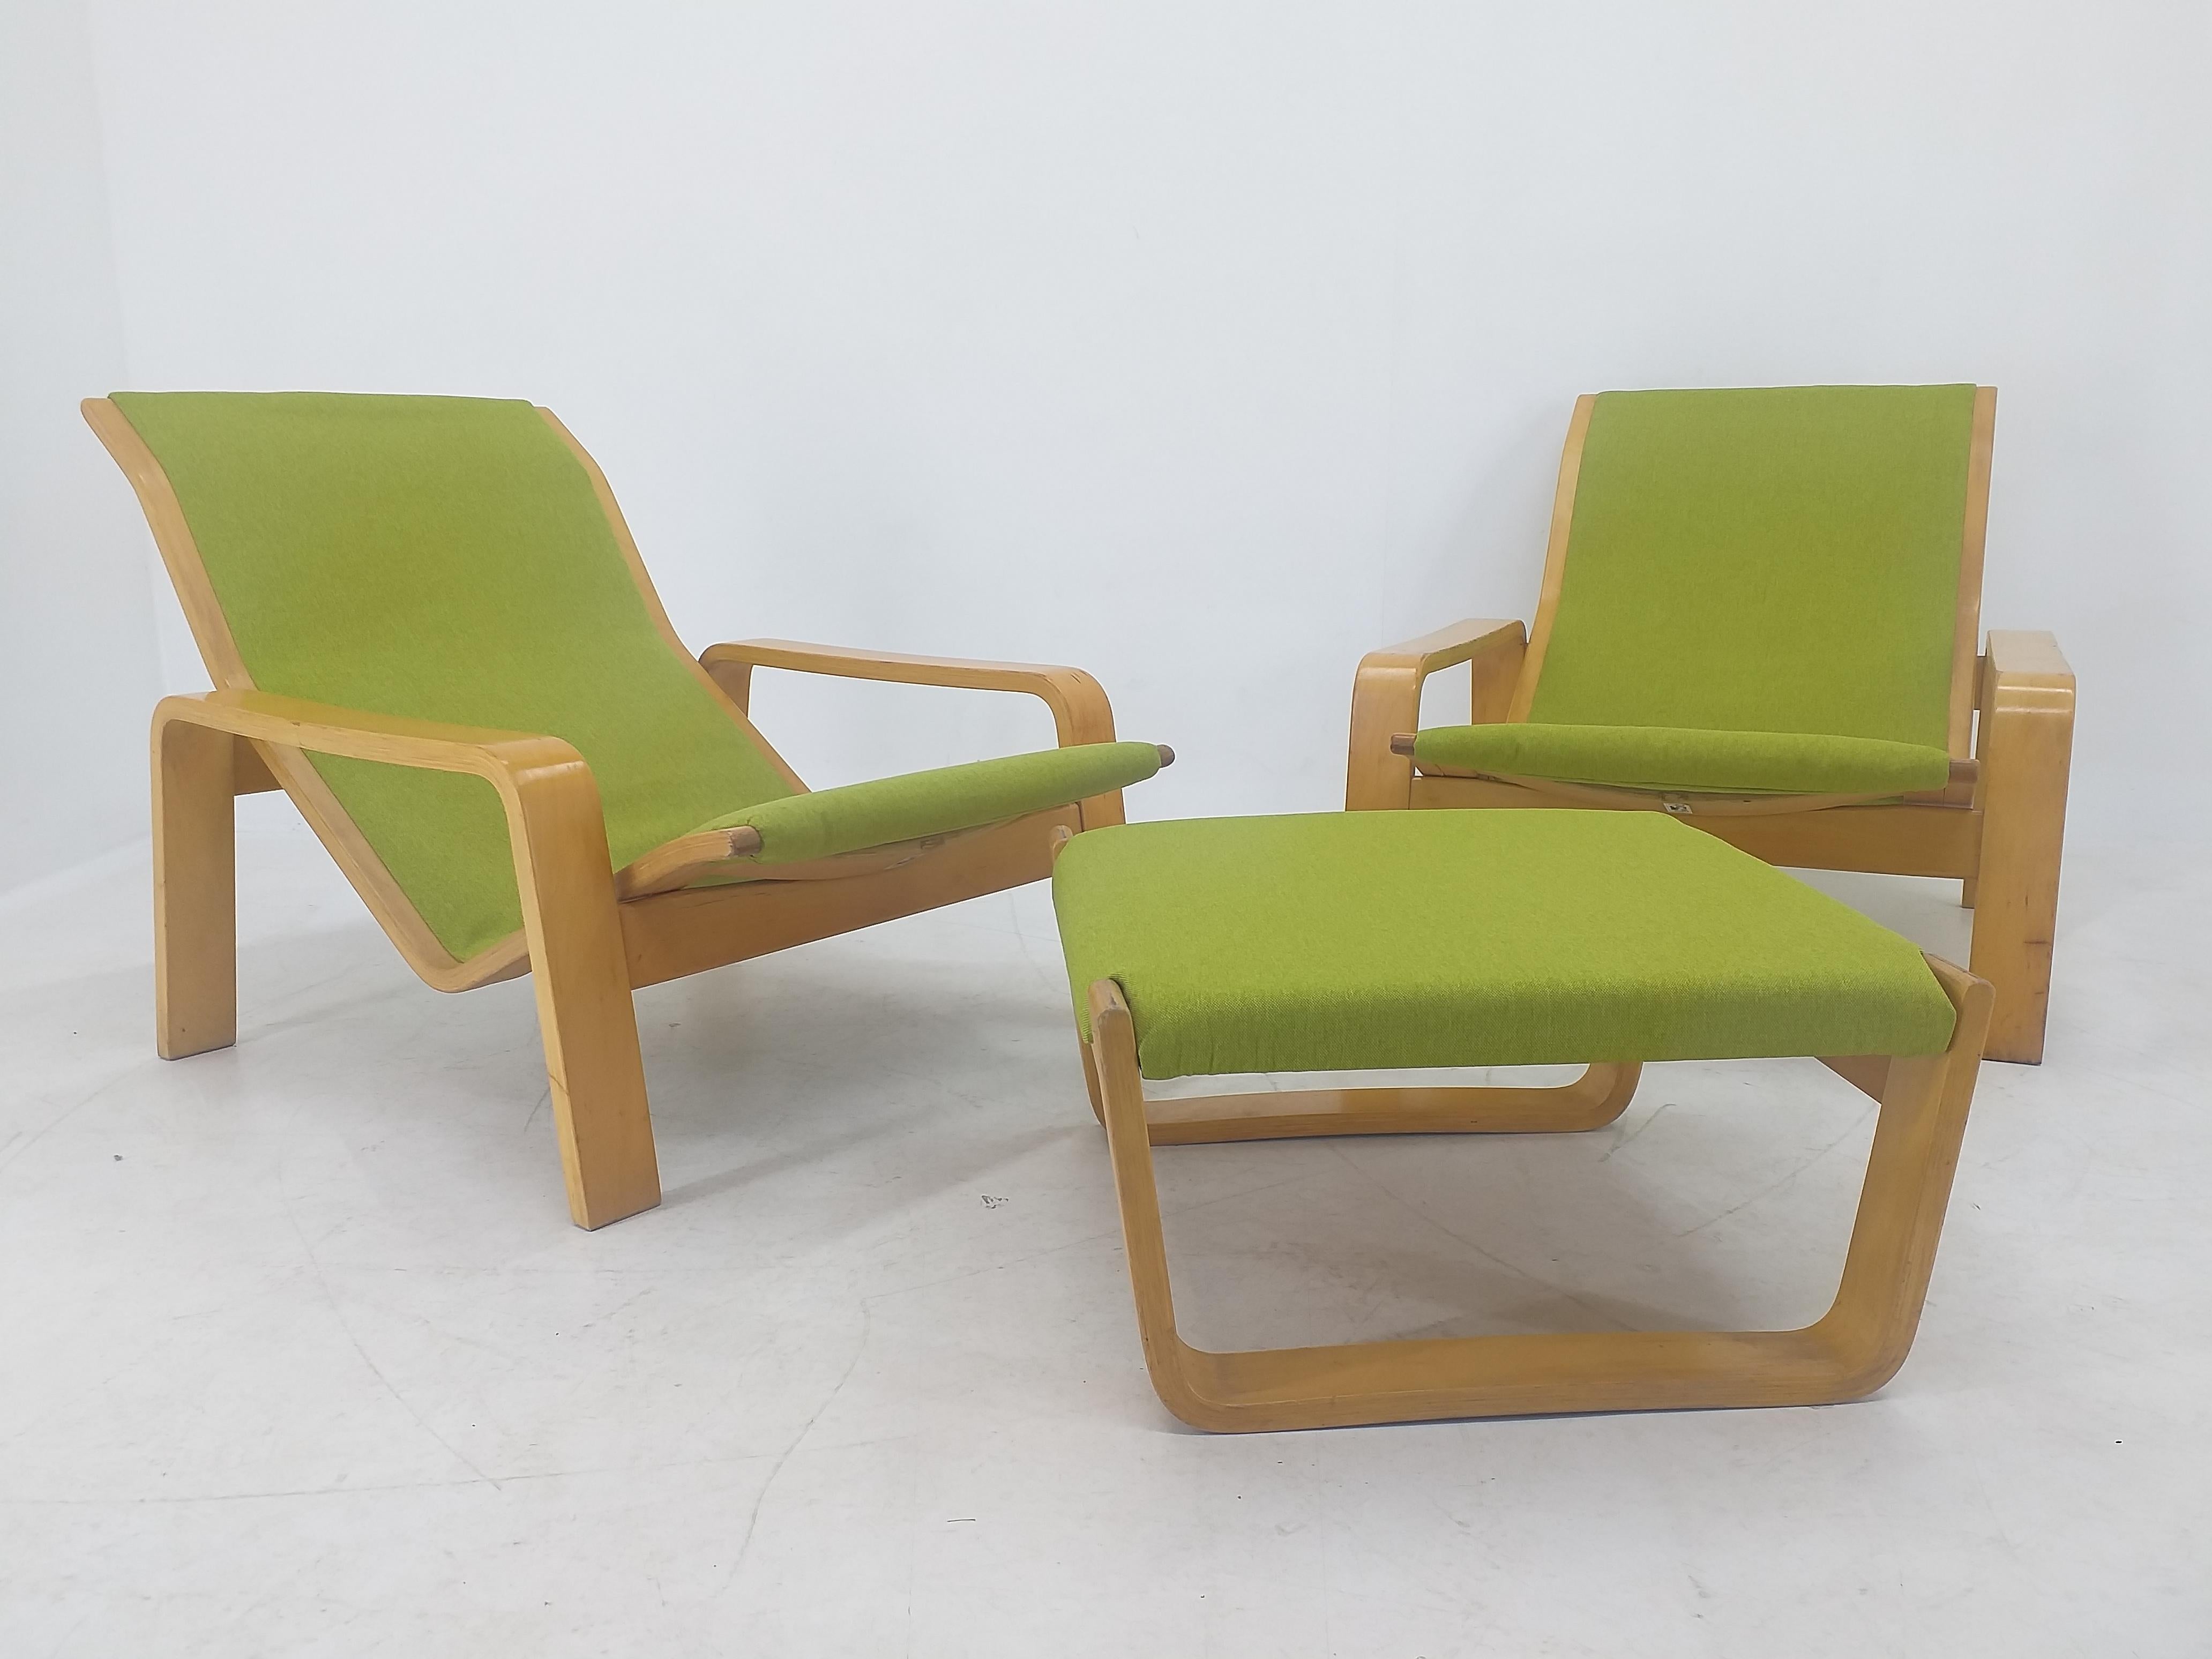 Pair of Lounge Chairs Pulkka, Ilmari Lappalainen for ASKO, Finland, 1970s In Good Condition For Sale In Praha, CZ